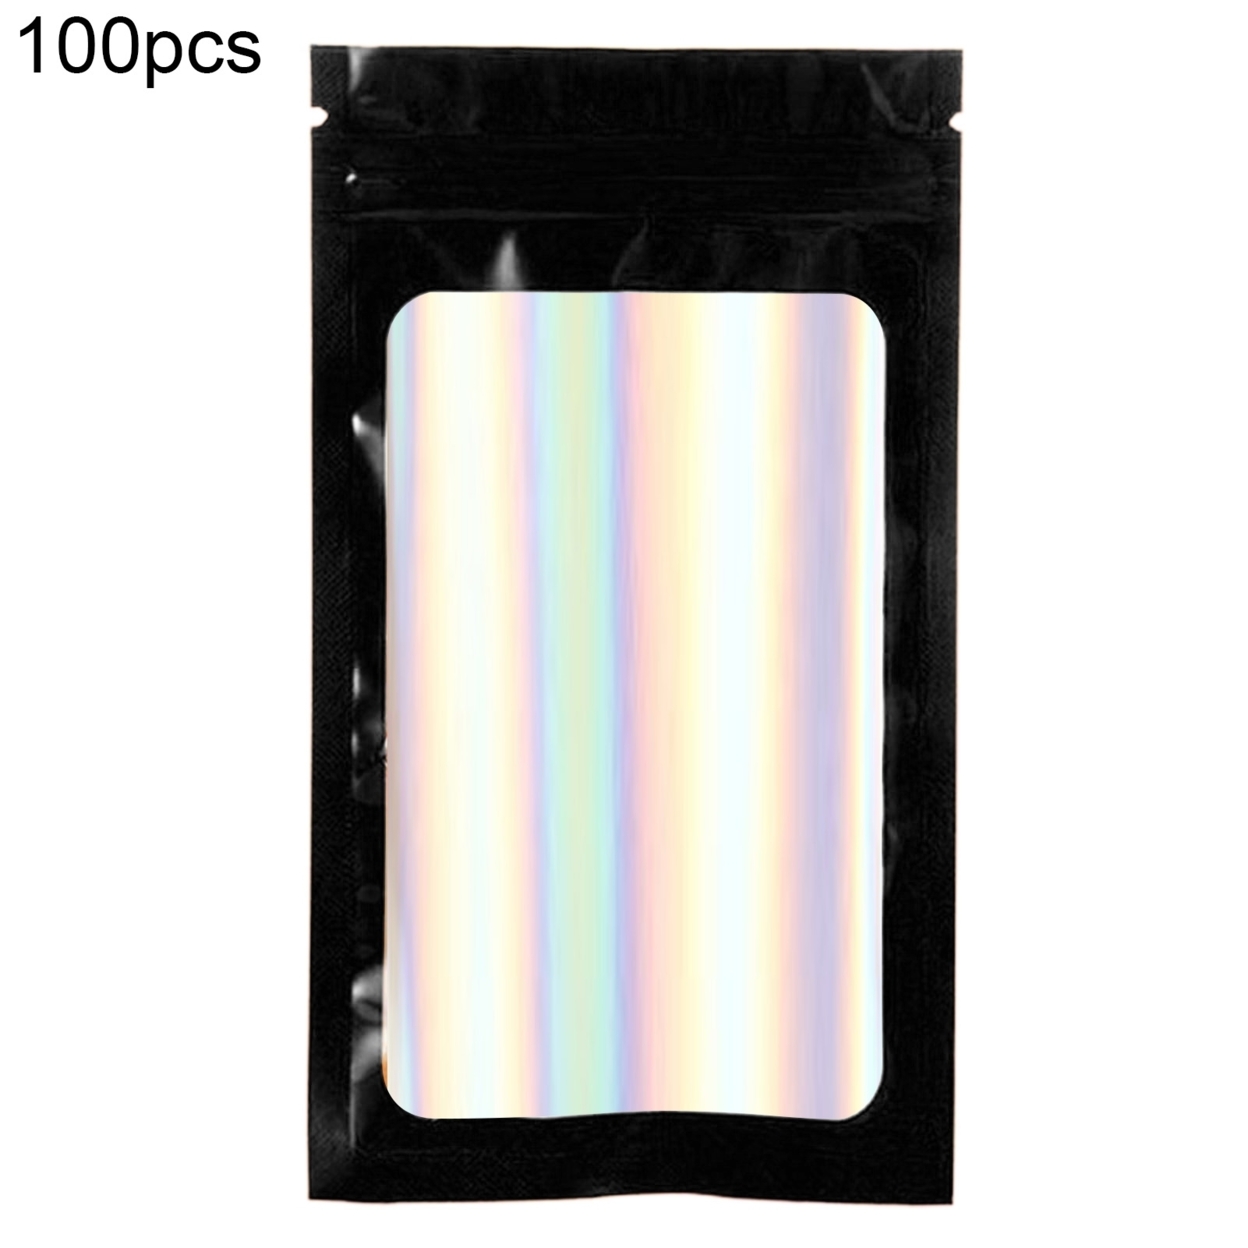 100Pcs/Set Zip-lock Bags Eye-catching Odor Proof Holographic Color Cosmetic Laser Packaging Bags for Kitchen - black, 10*18cm